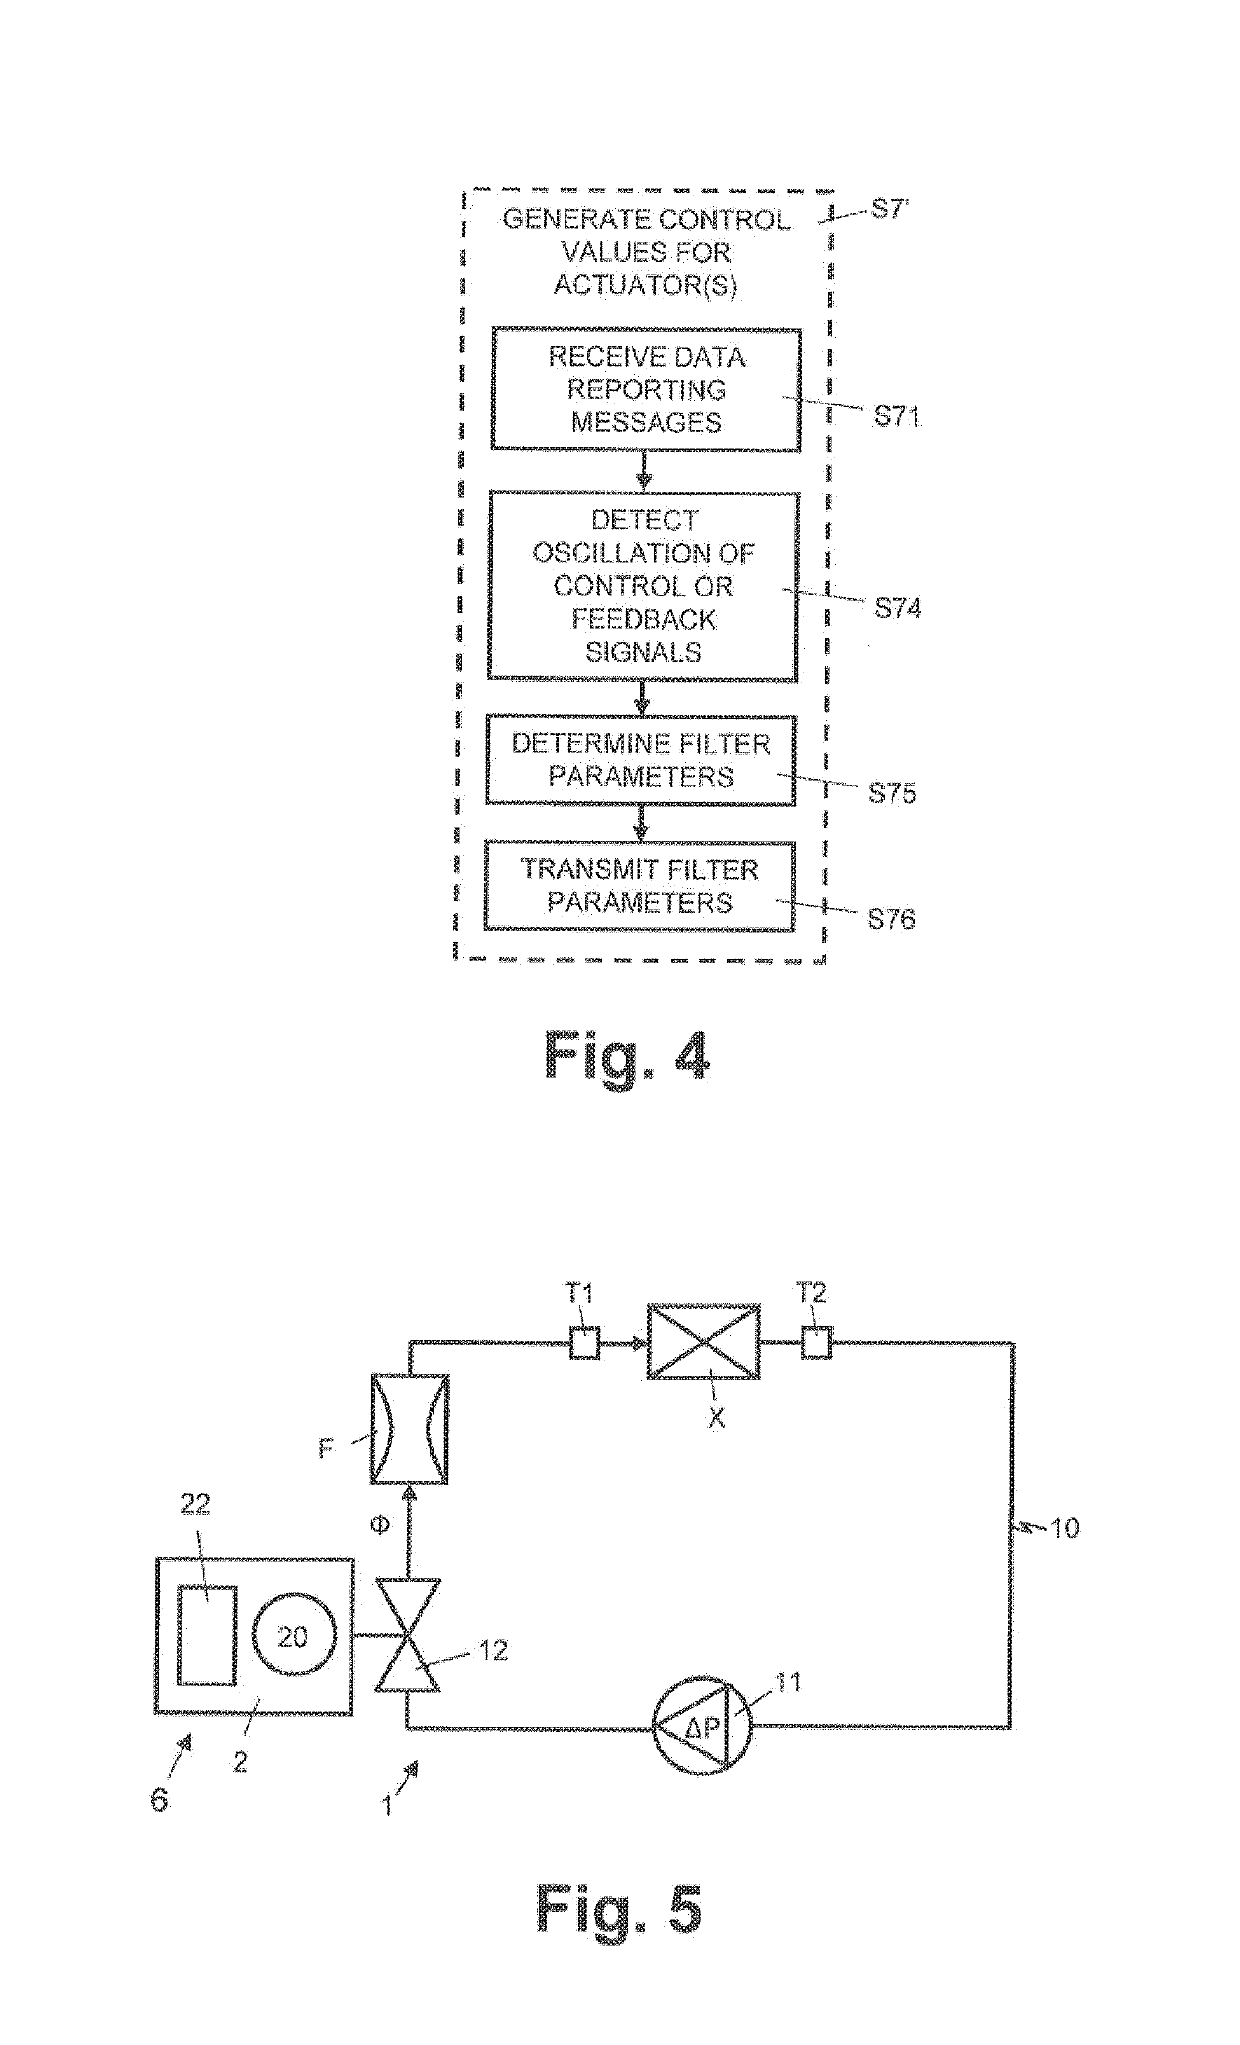 Method and computer system for monitoring an HVAC system